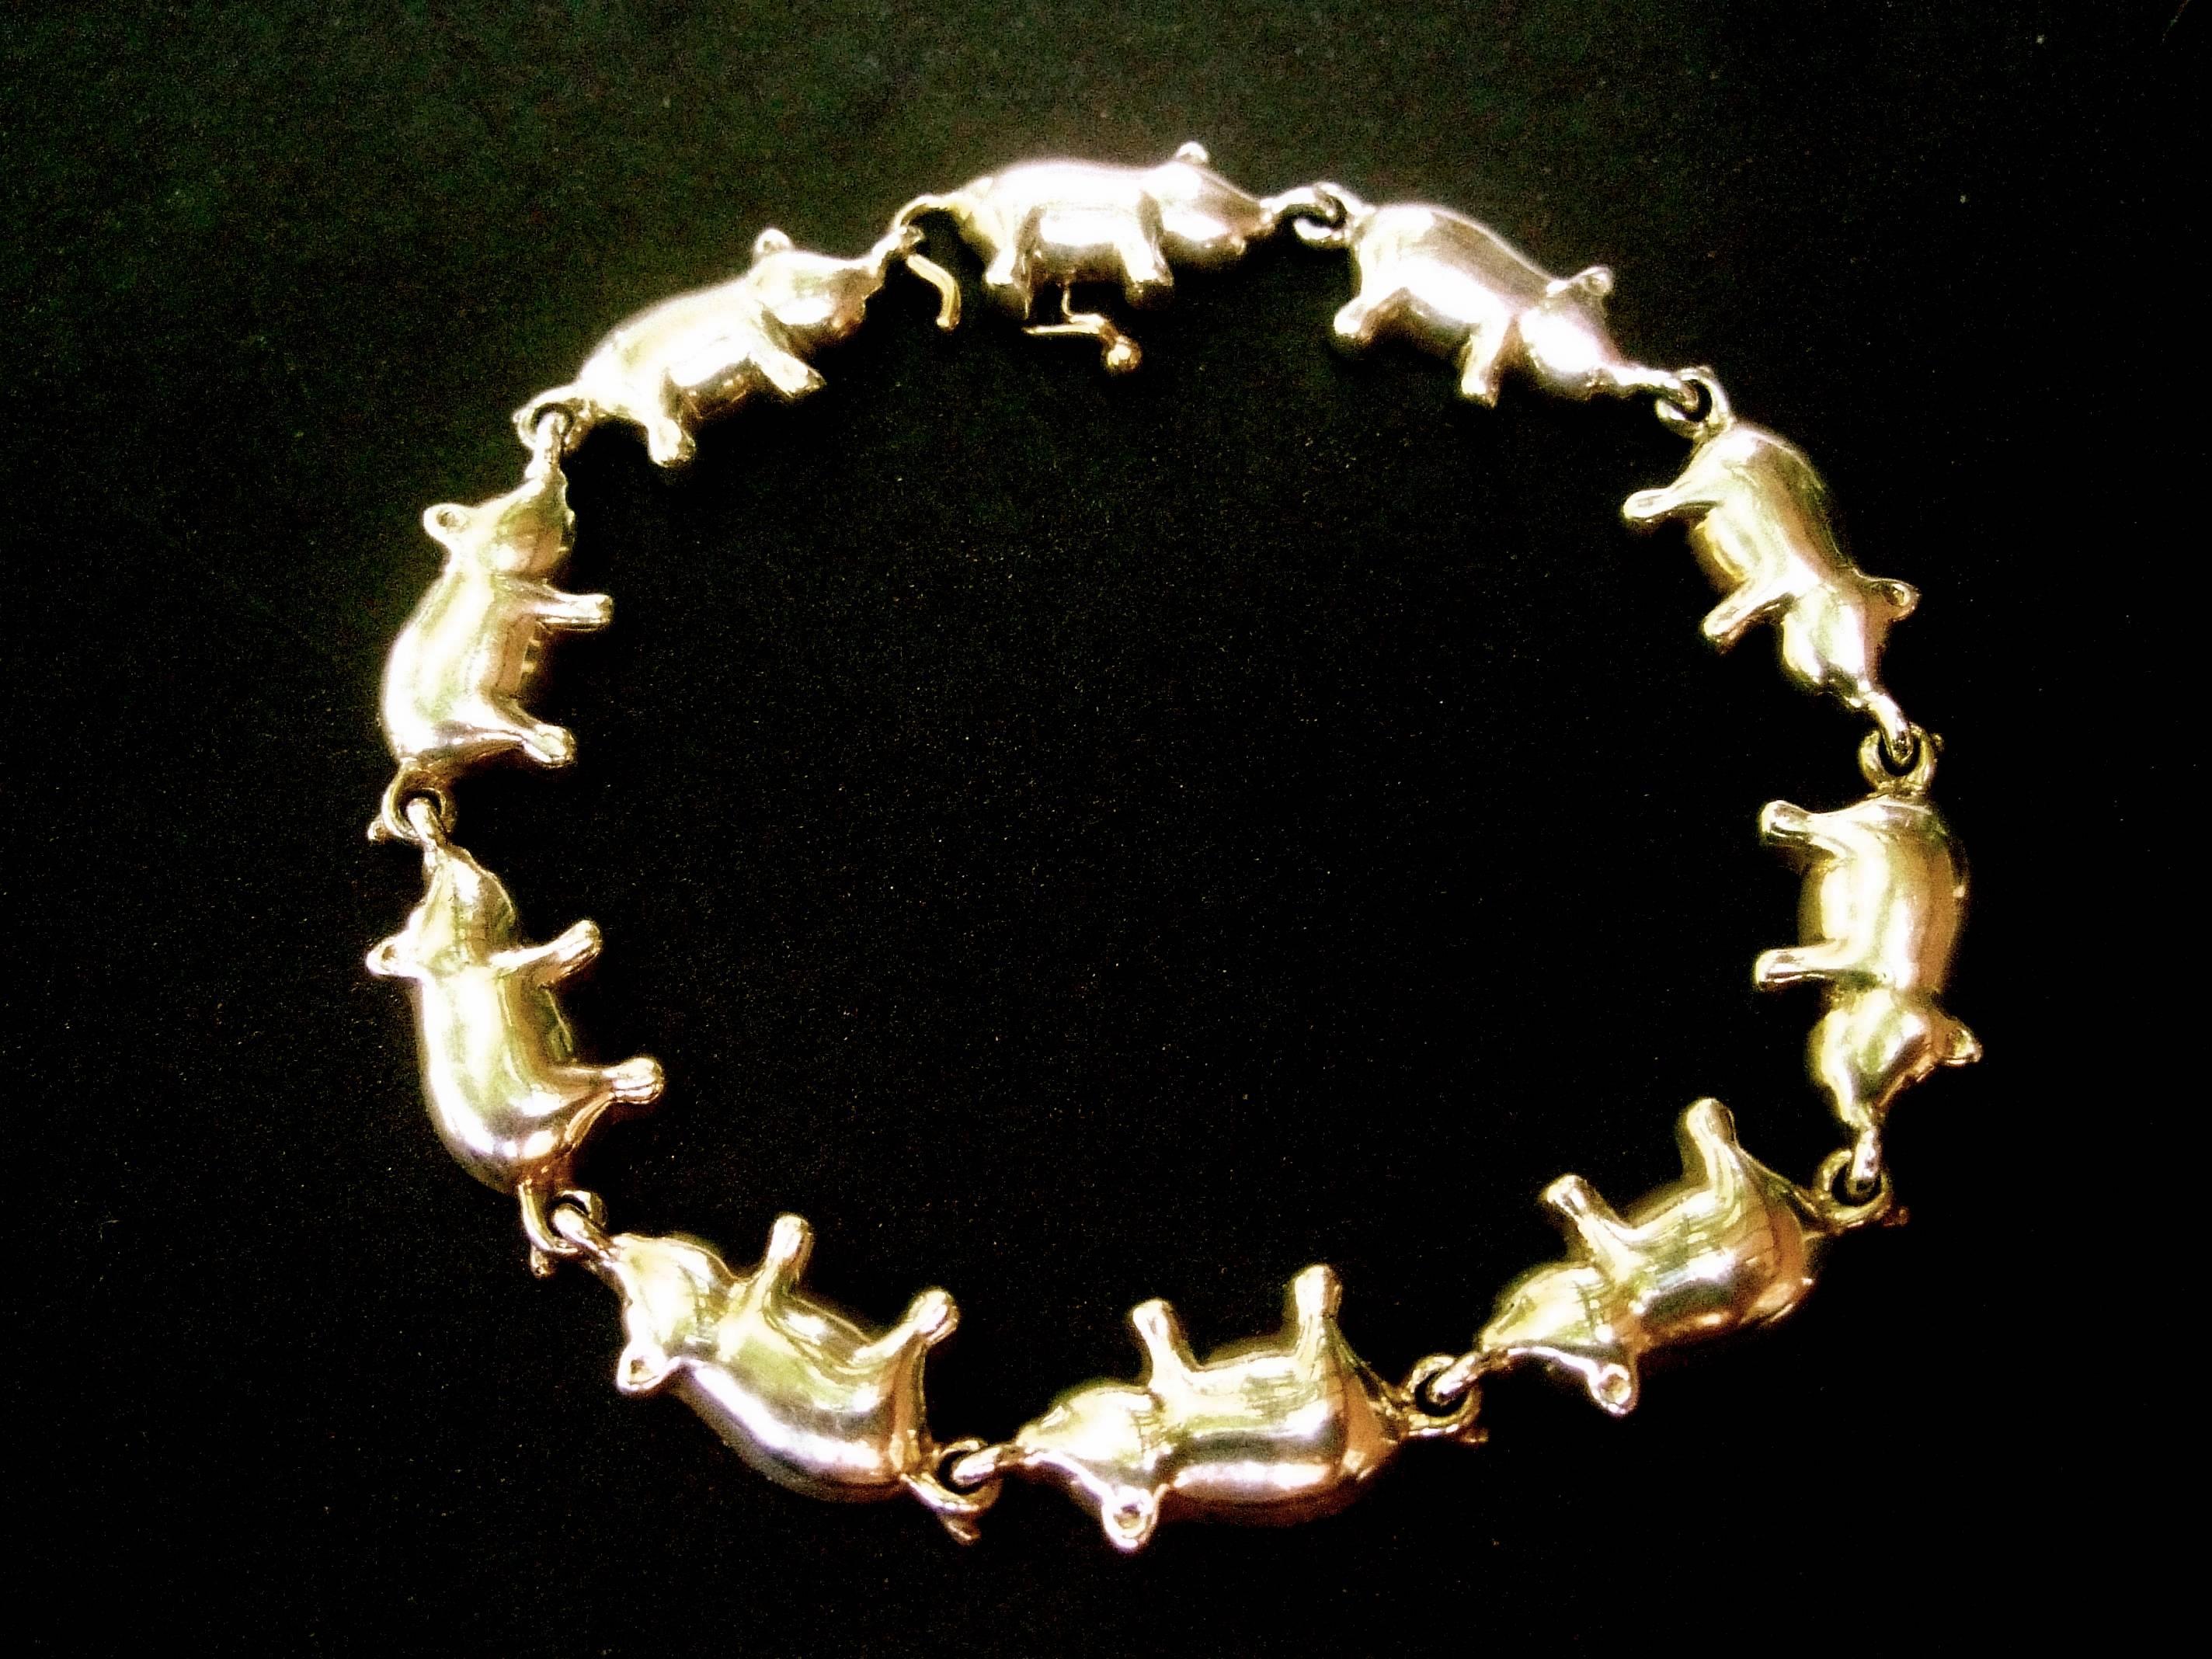 Whimsical sterling silver pig theme link bracelet 
The adorable series of pigs are hinged together 
by their curled tails 

Makes a charming fun accessory 

Measurements 
The series of hinged pigs measures 7.5 inches in length
The pig figures